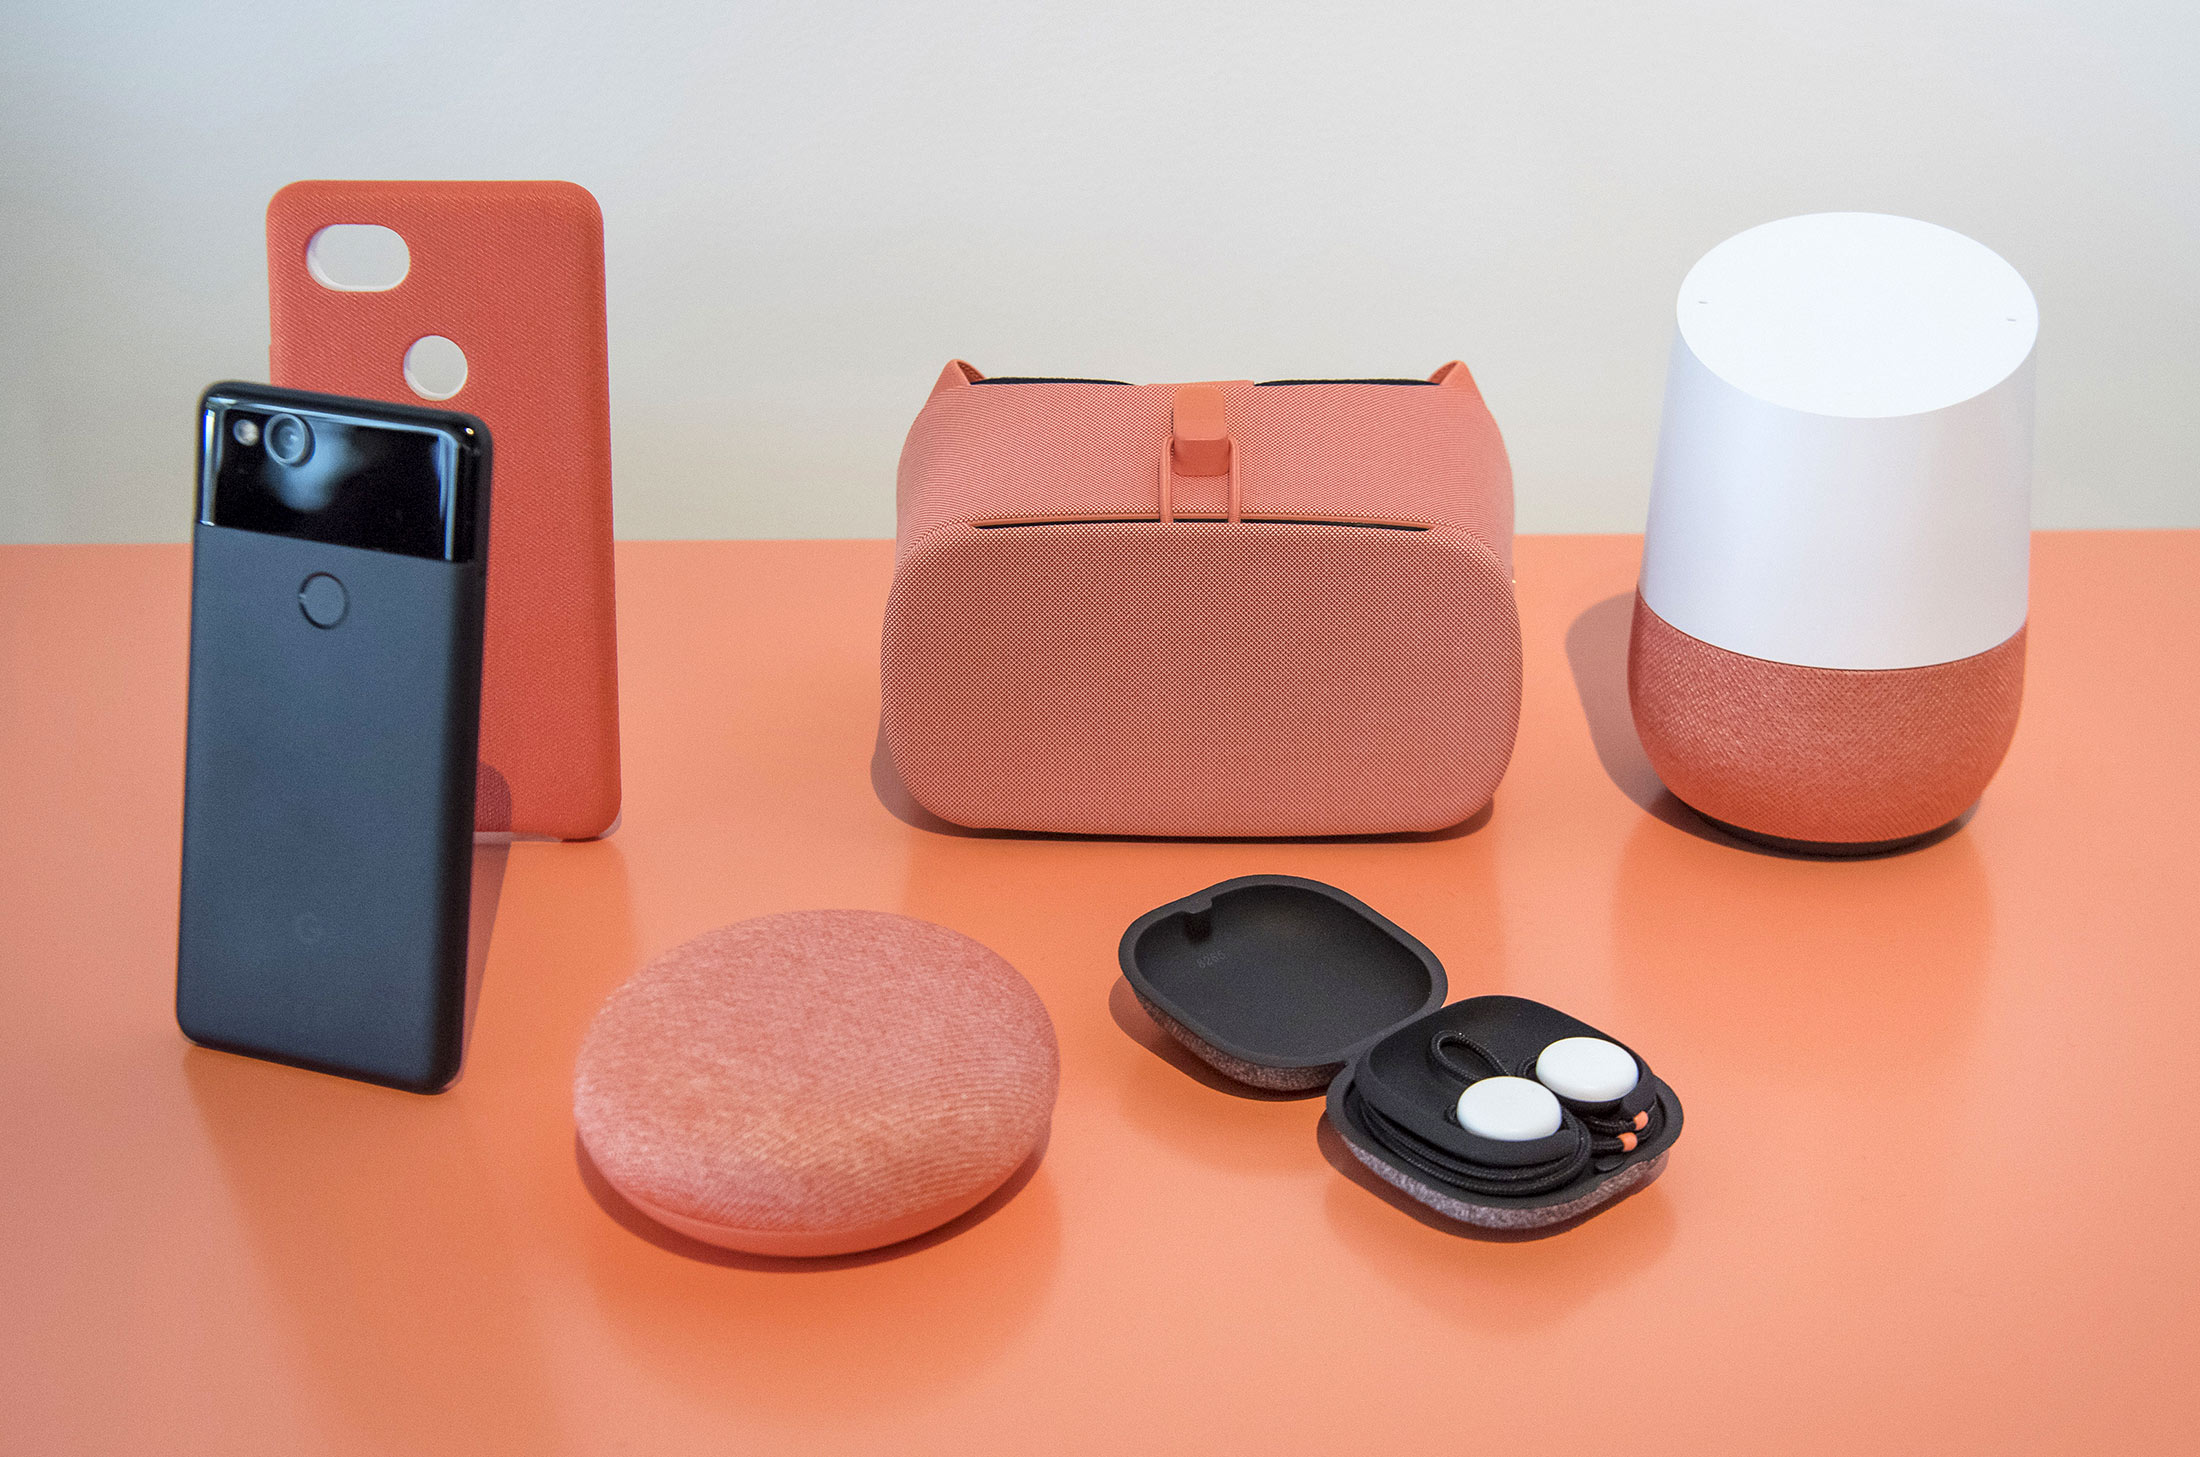 The Google Pixel 2 smartphone, from left, Home Mini voice speaker, Daydream virtual reality headset, Pixel Buds headphones and Google Home device are arranged for a photograph during a product launch event in San Francisco, California, U.S., on Wednesday, Oct. 4, 2017.